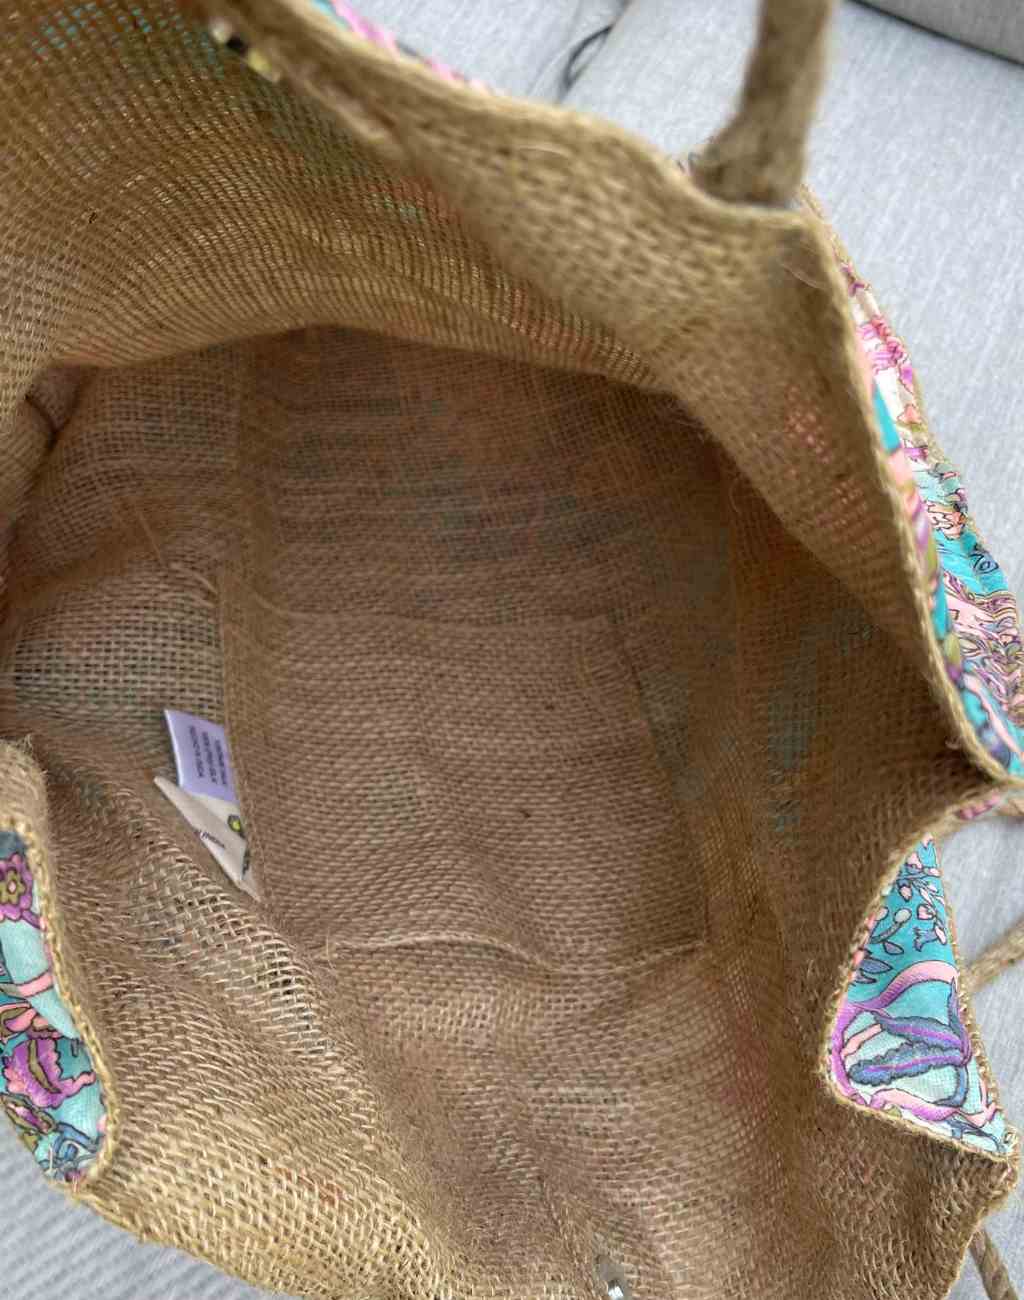 Vintage Silk Covered Jute Tote Bag in Blue, Pink, and Gold - Visit Nifty Nifty 